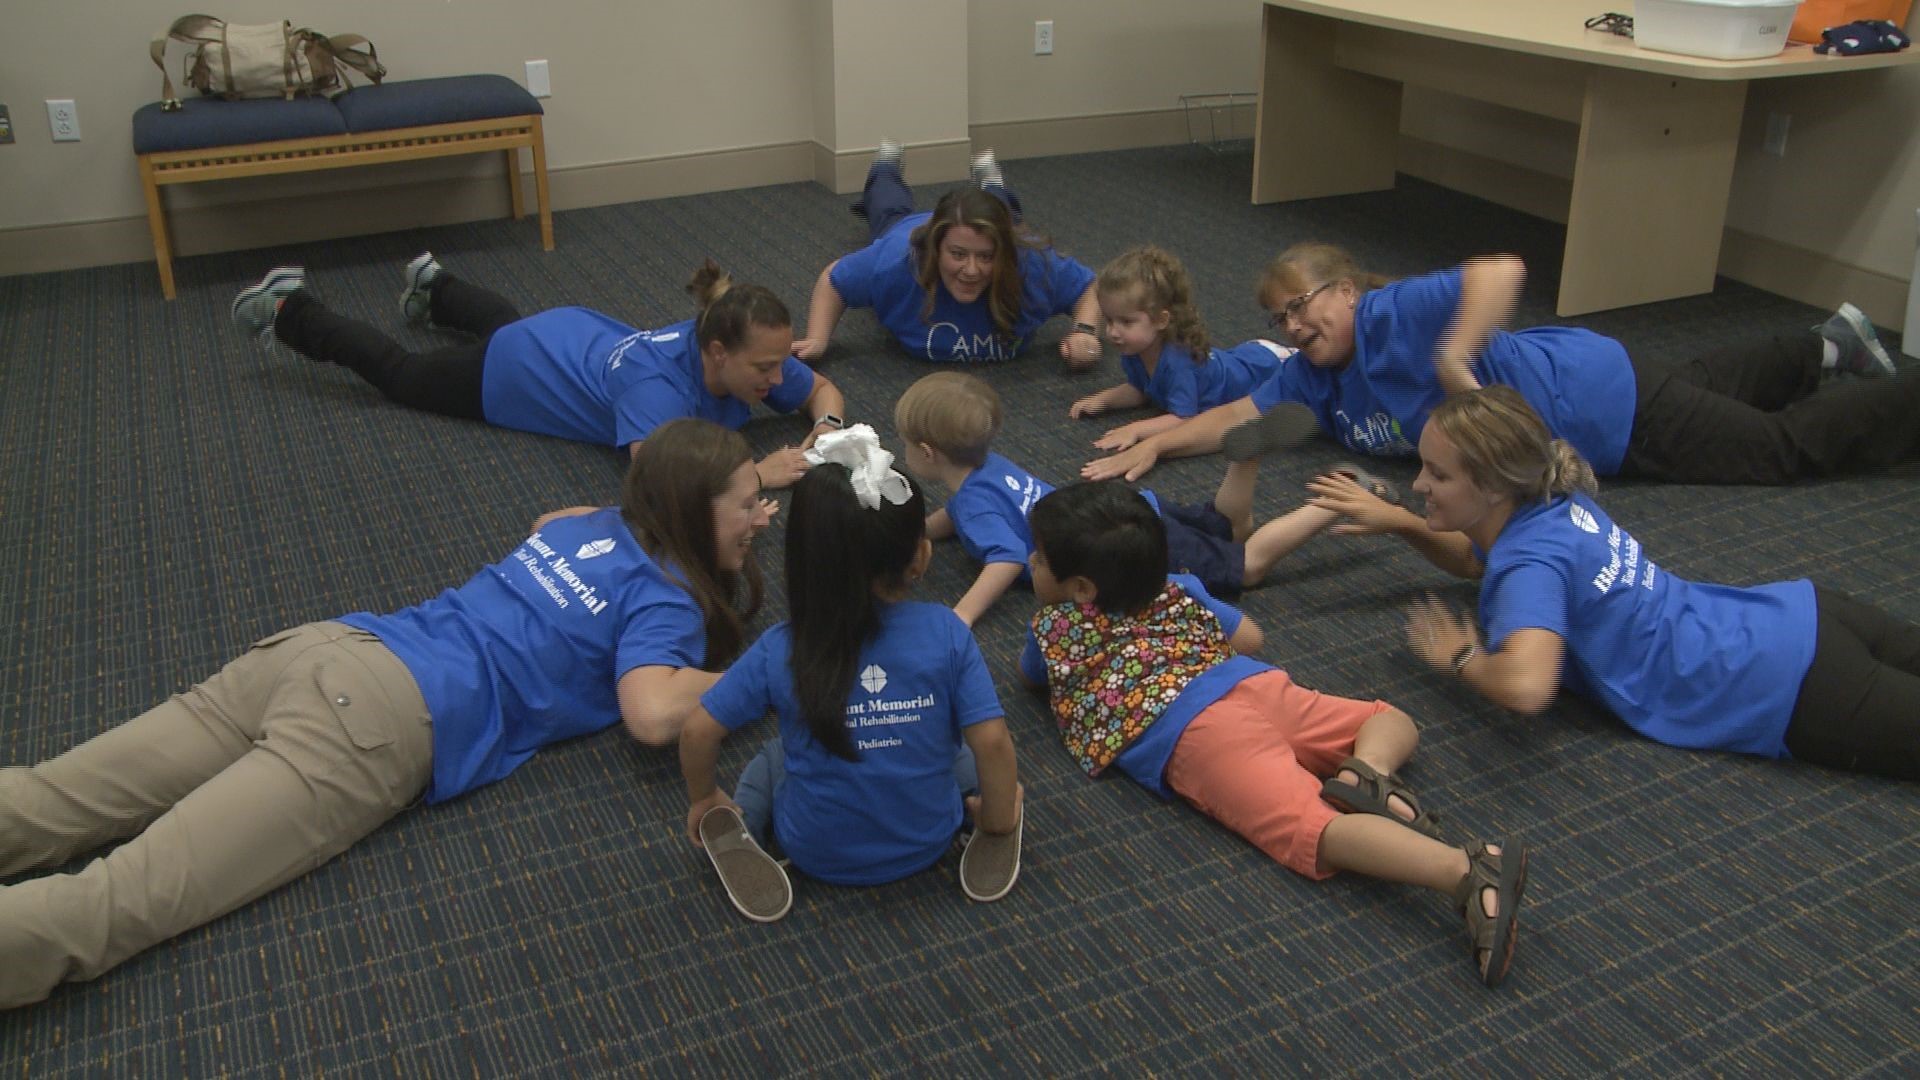 The focus of Camp Grow is speech therapy and occupational therapy